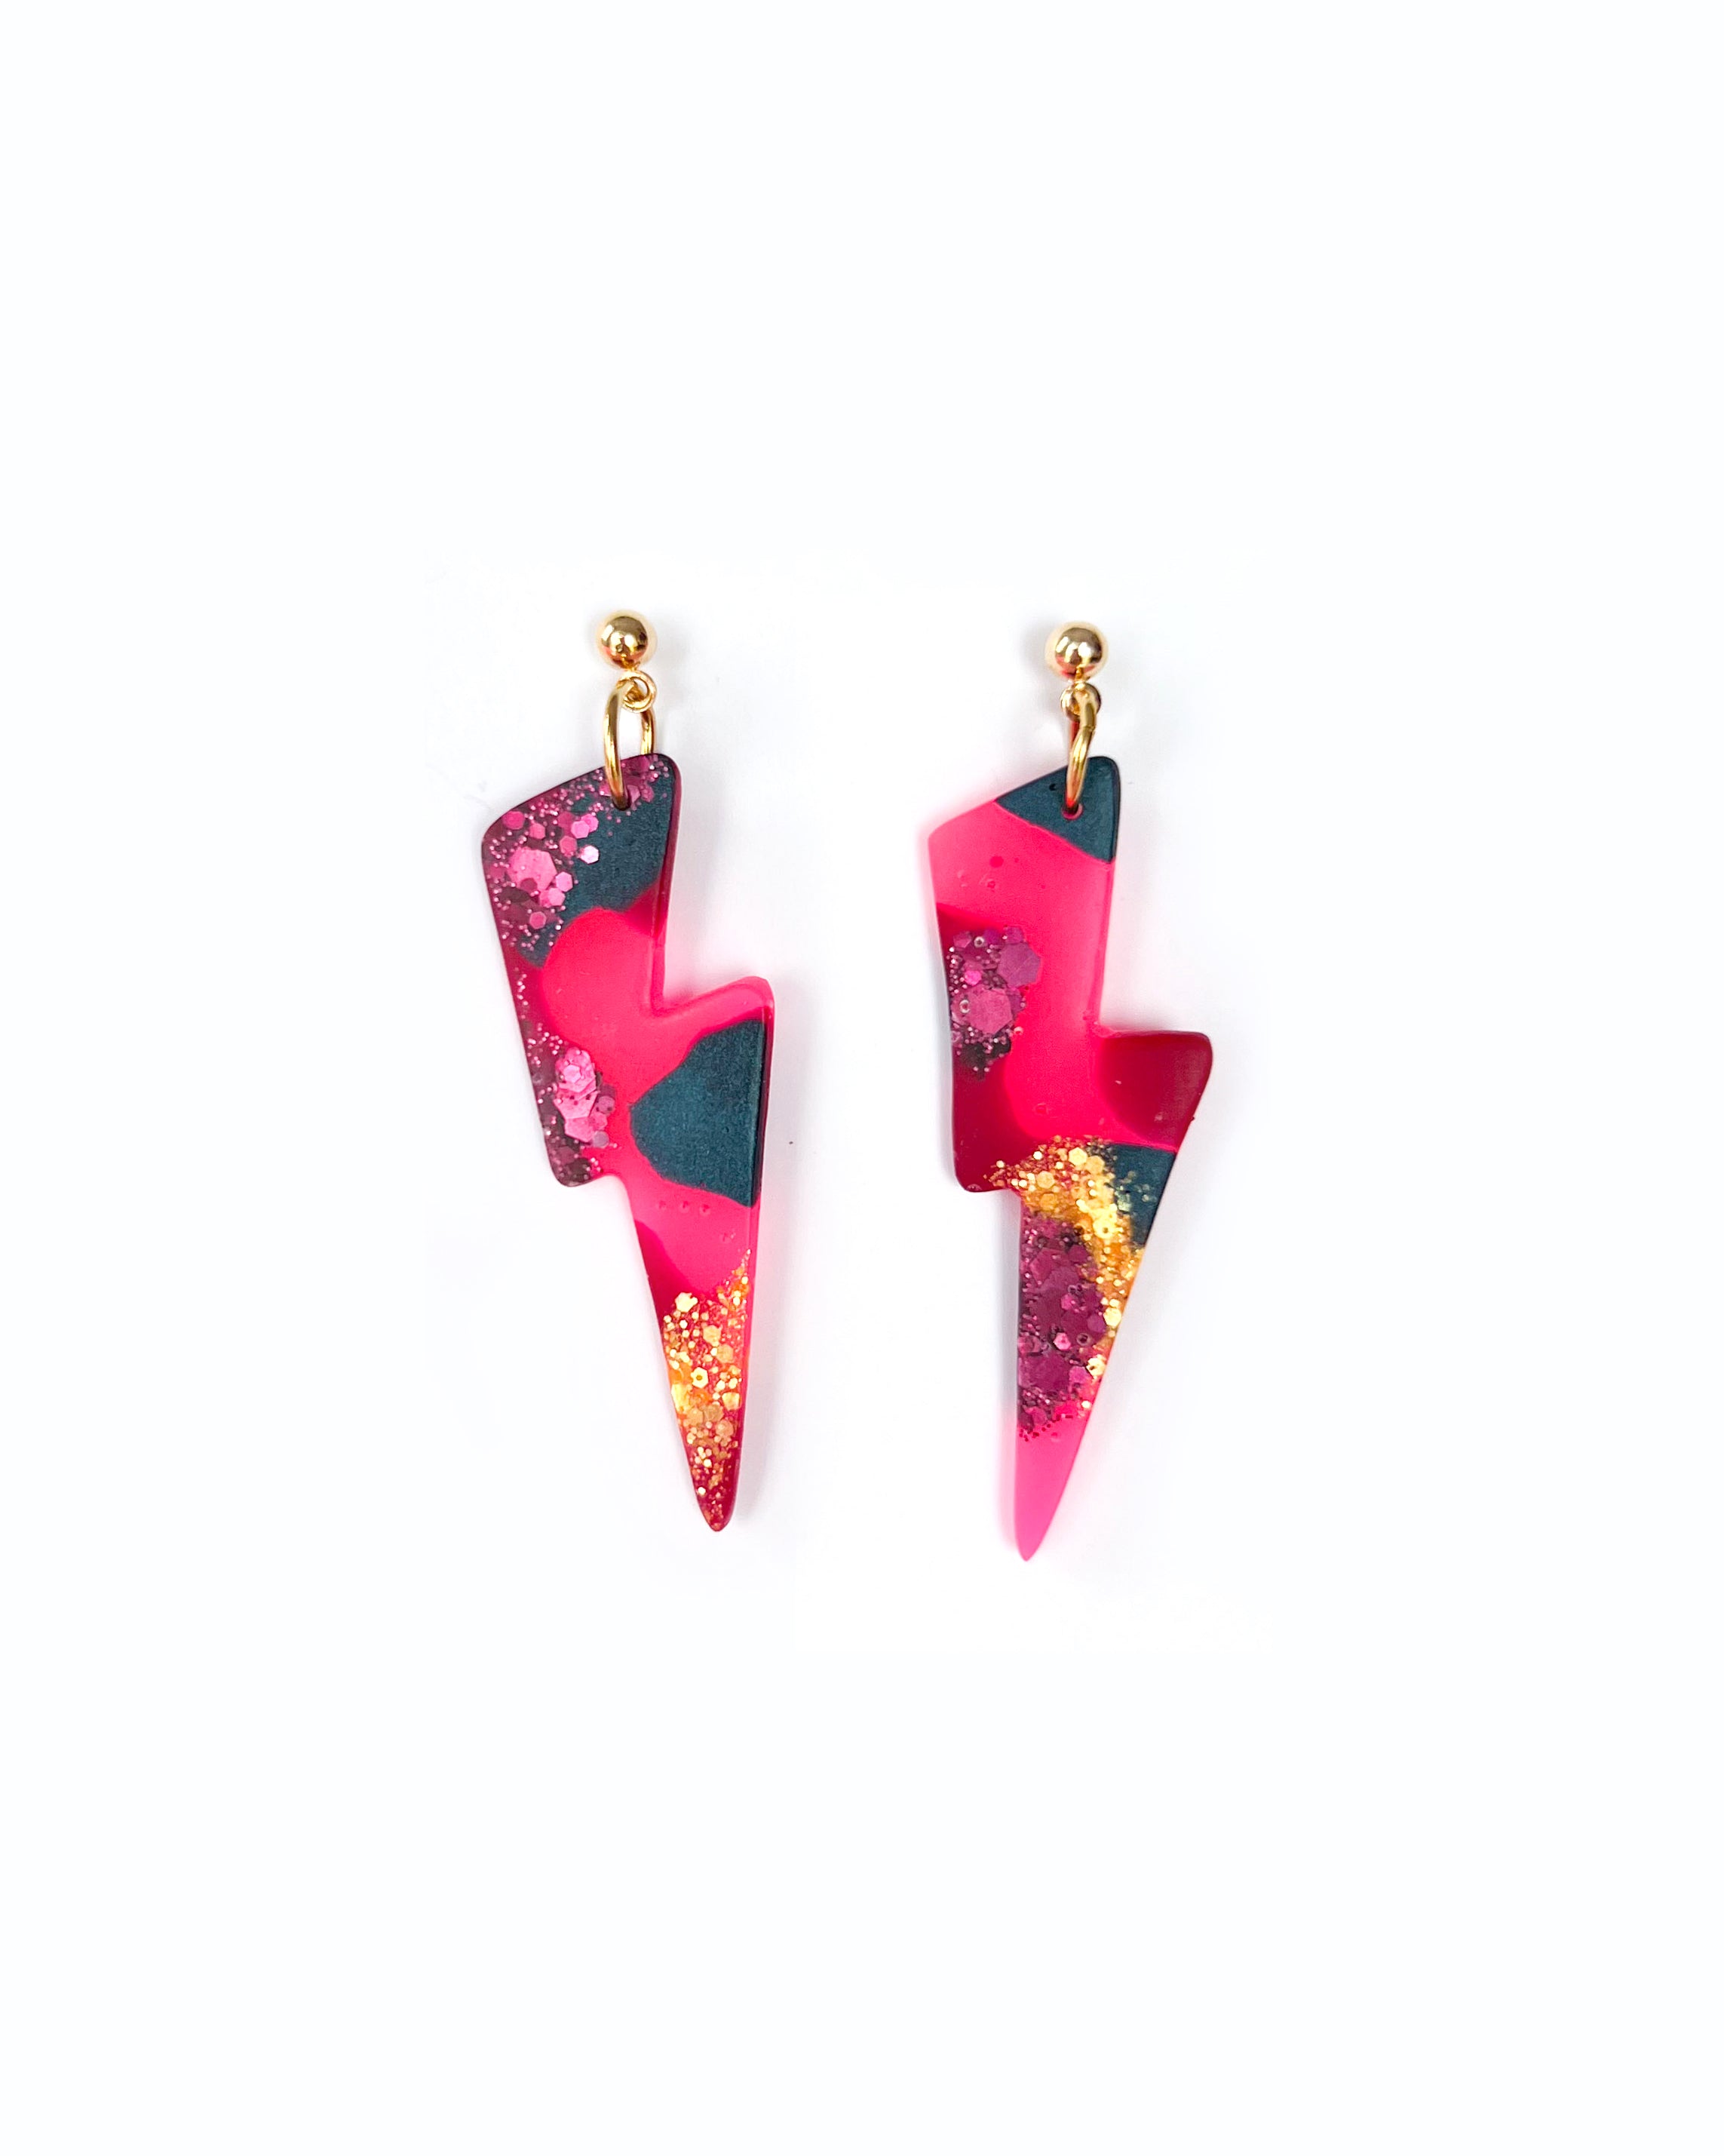 Flash statement earrings, Pink fashion earrings with colourful glitter, Handmade jewelry gift